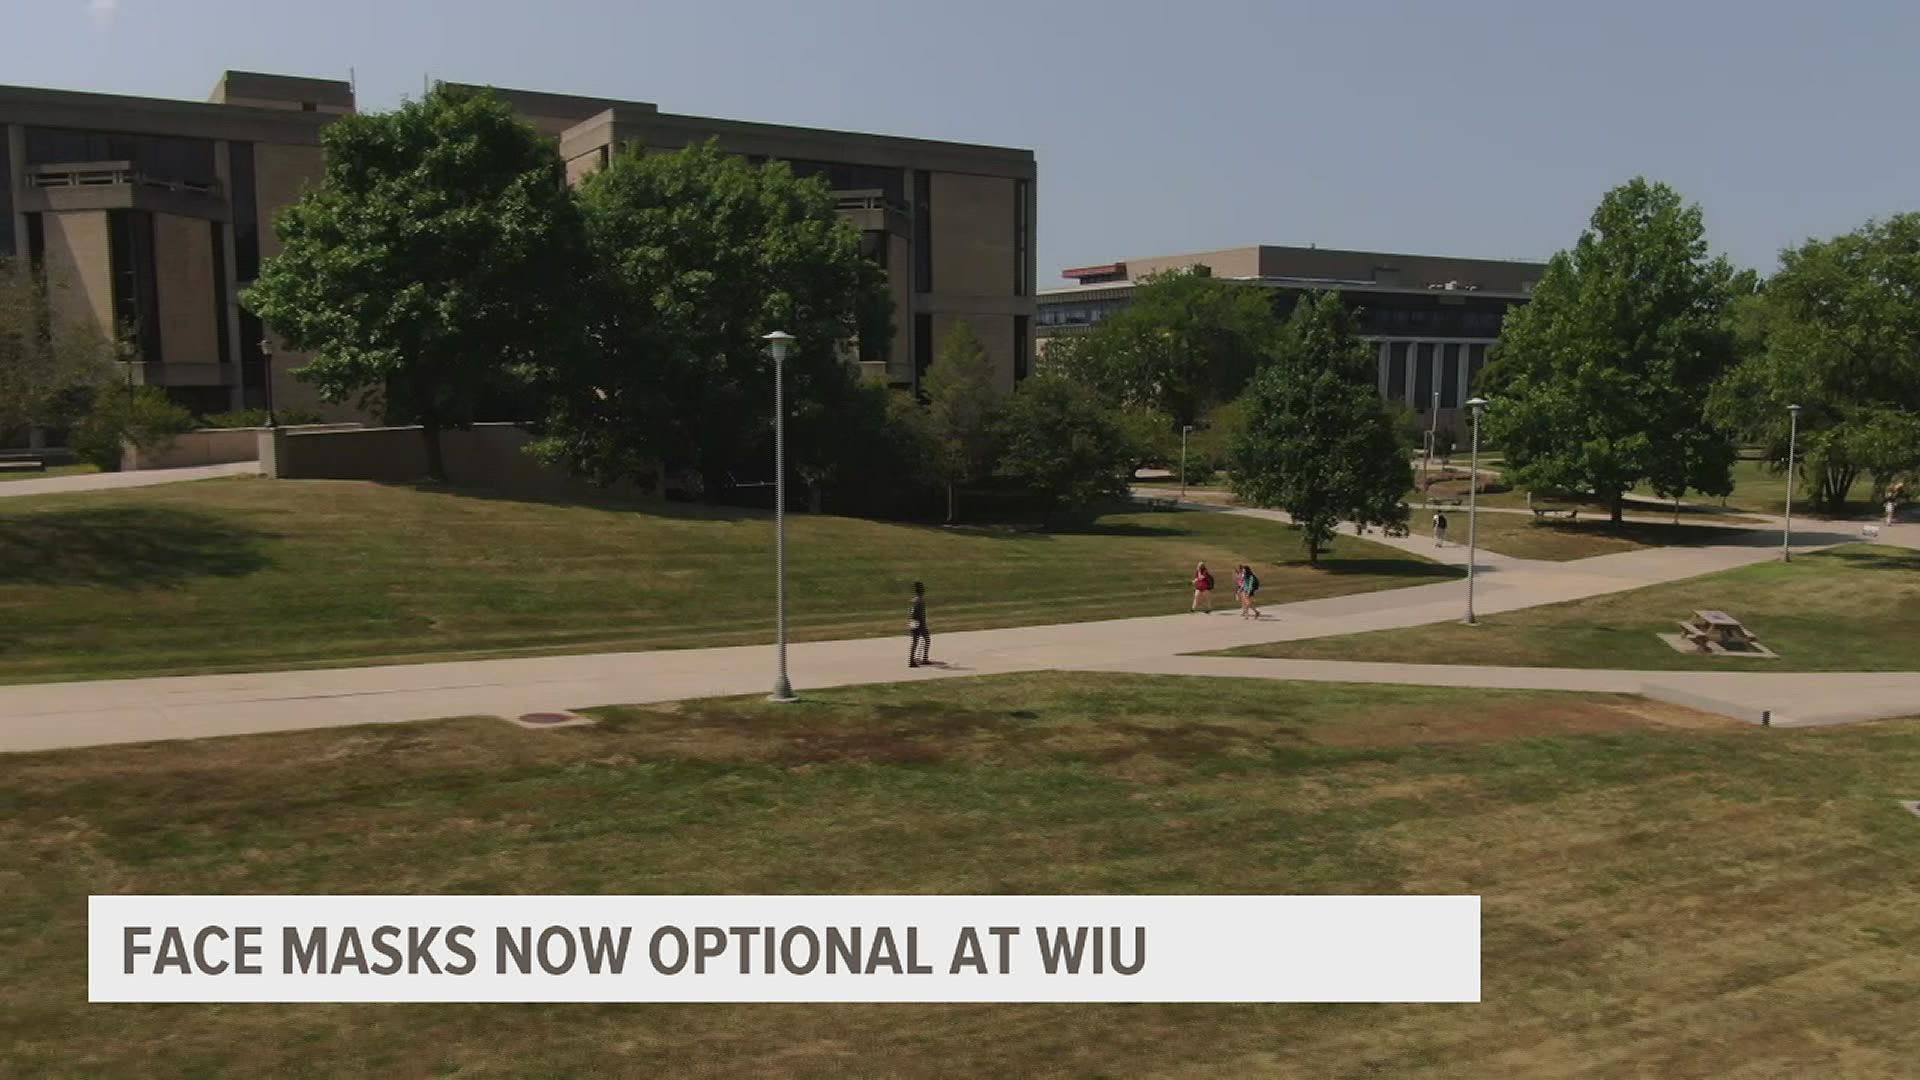 Students and faculty are expected to carry a face mask on them but are not required to wear it in most places on Western Illinois University campuses.